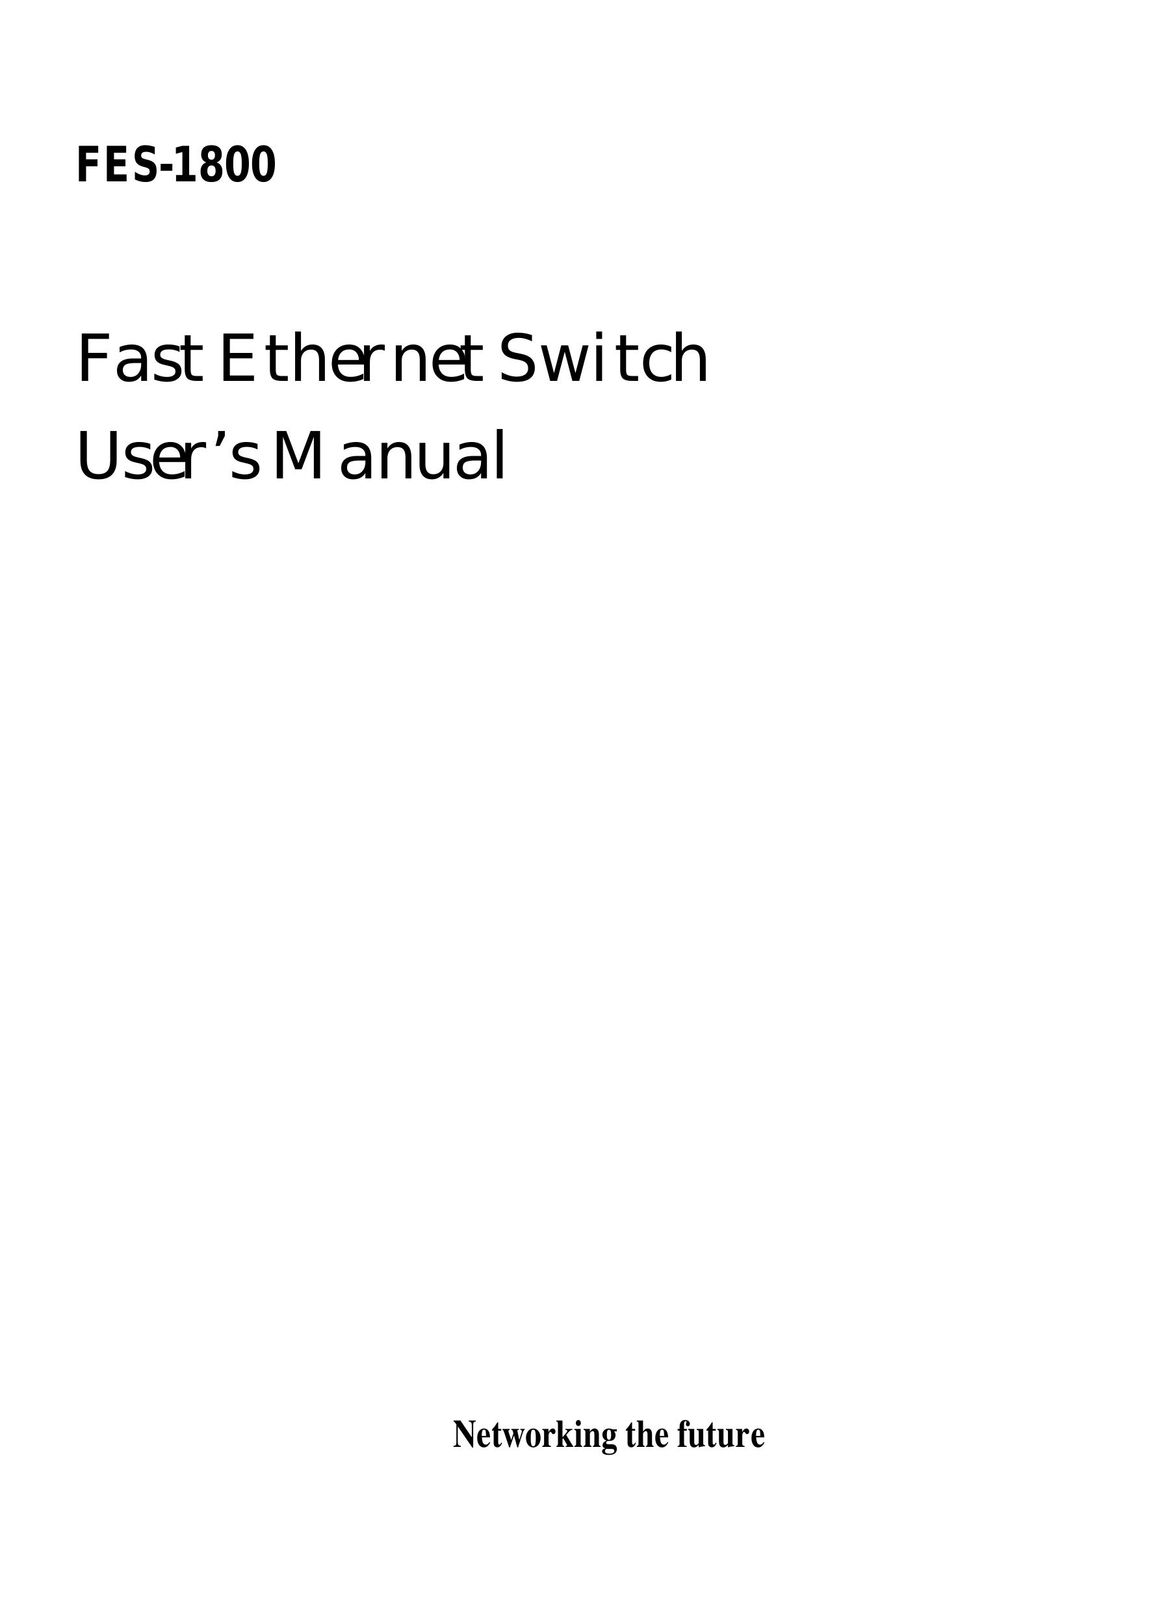 Network Technologies FES-1800 Switch User Manual